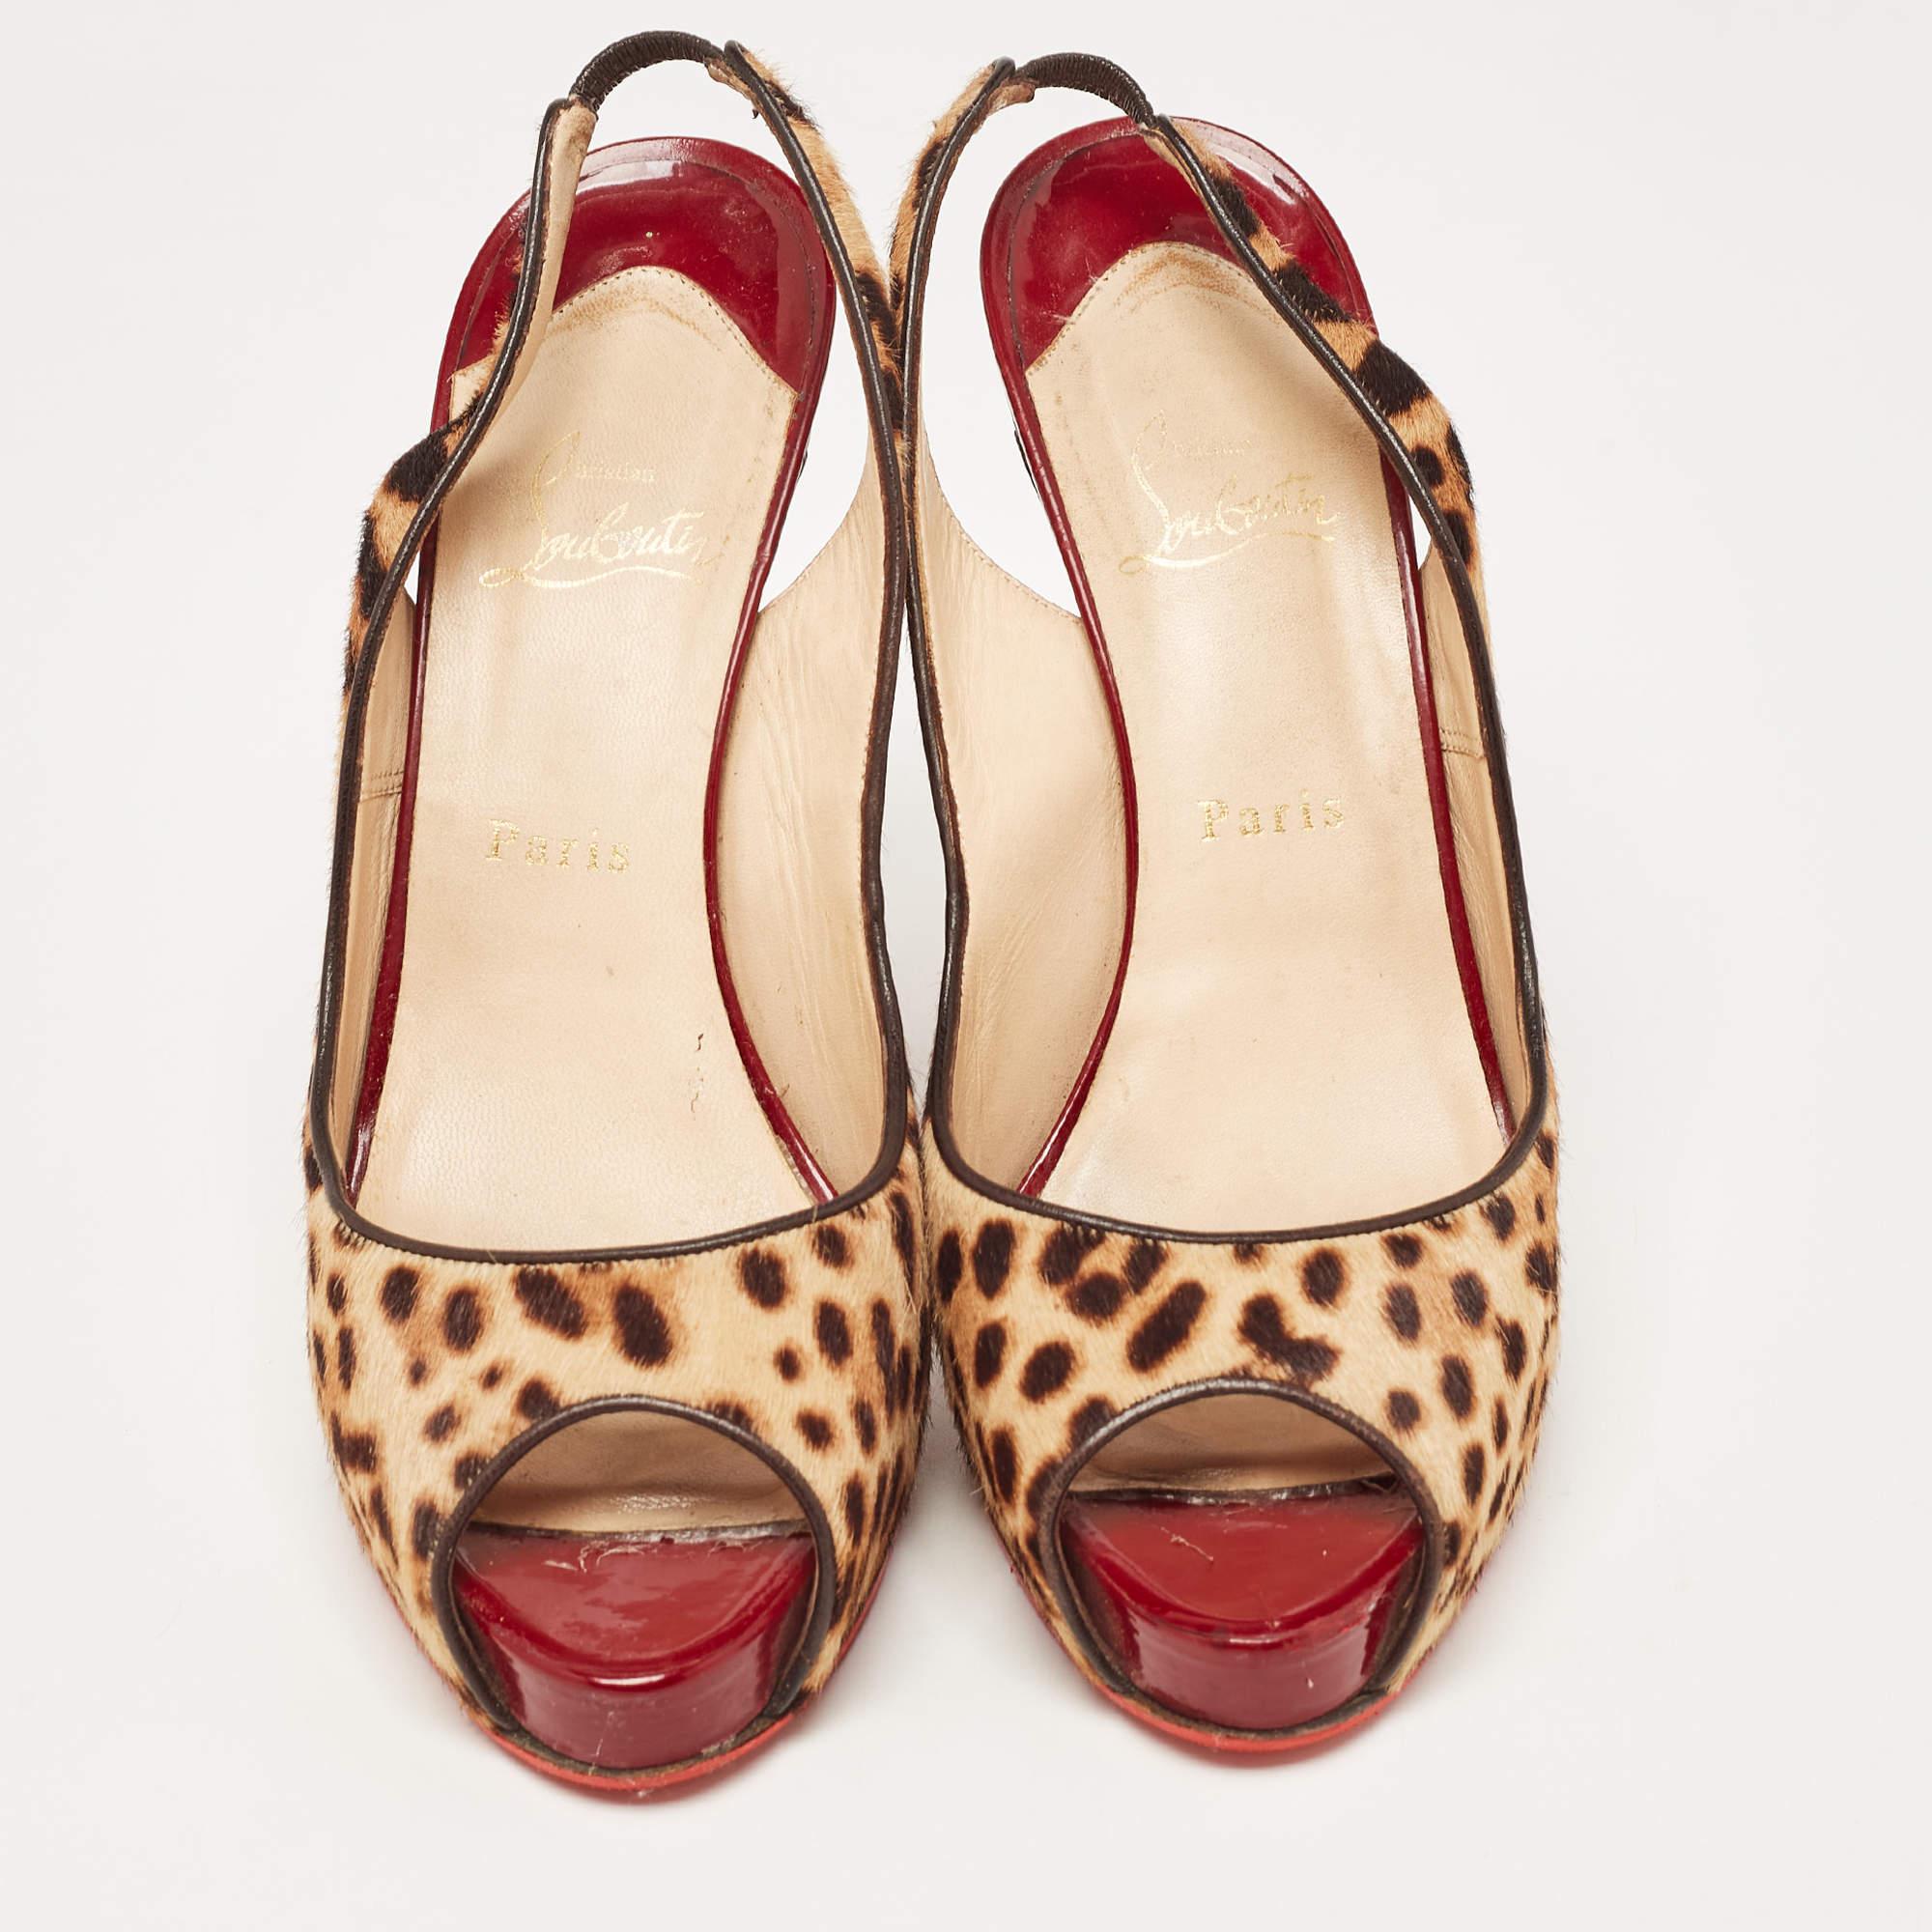 These slingback pumps from Christian Louboutin are meant to be a loved choice. Wonderfully crafted and balanced on sleek heels, the pumps will lift your feet in a stunning silhouette.

Includes
Original Dustbag